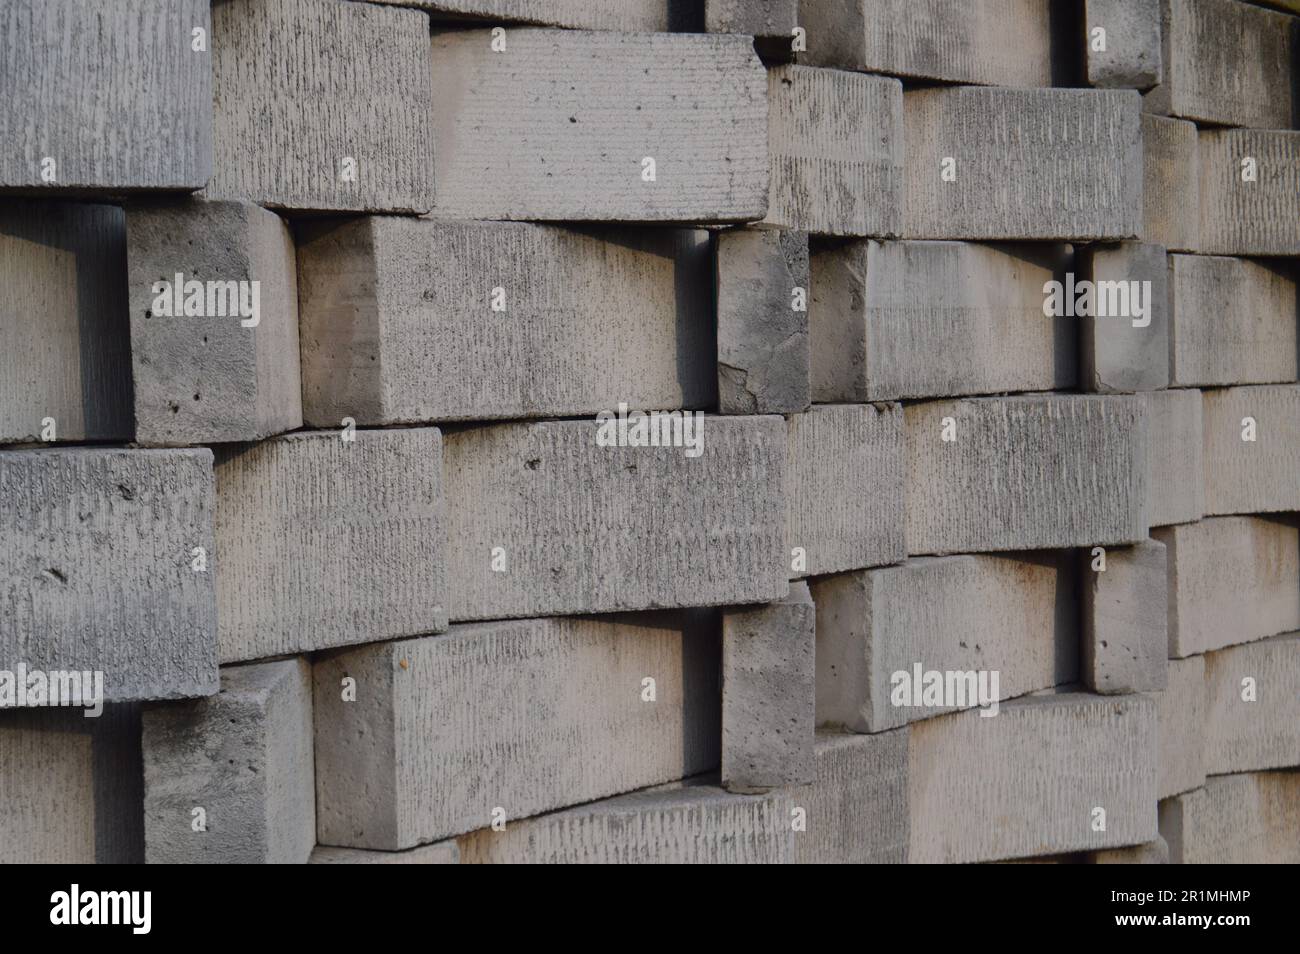 background pattern, shape, texture of walls or walls made of light brick material or white Hebel brick Stock Photo